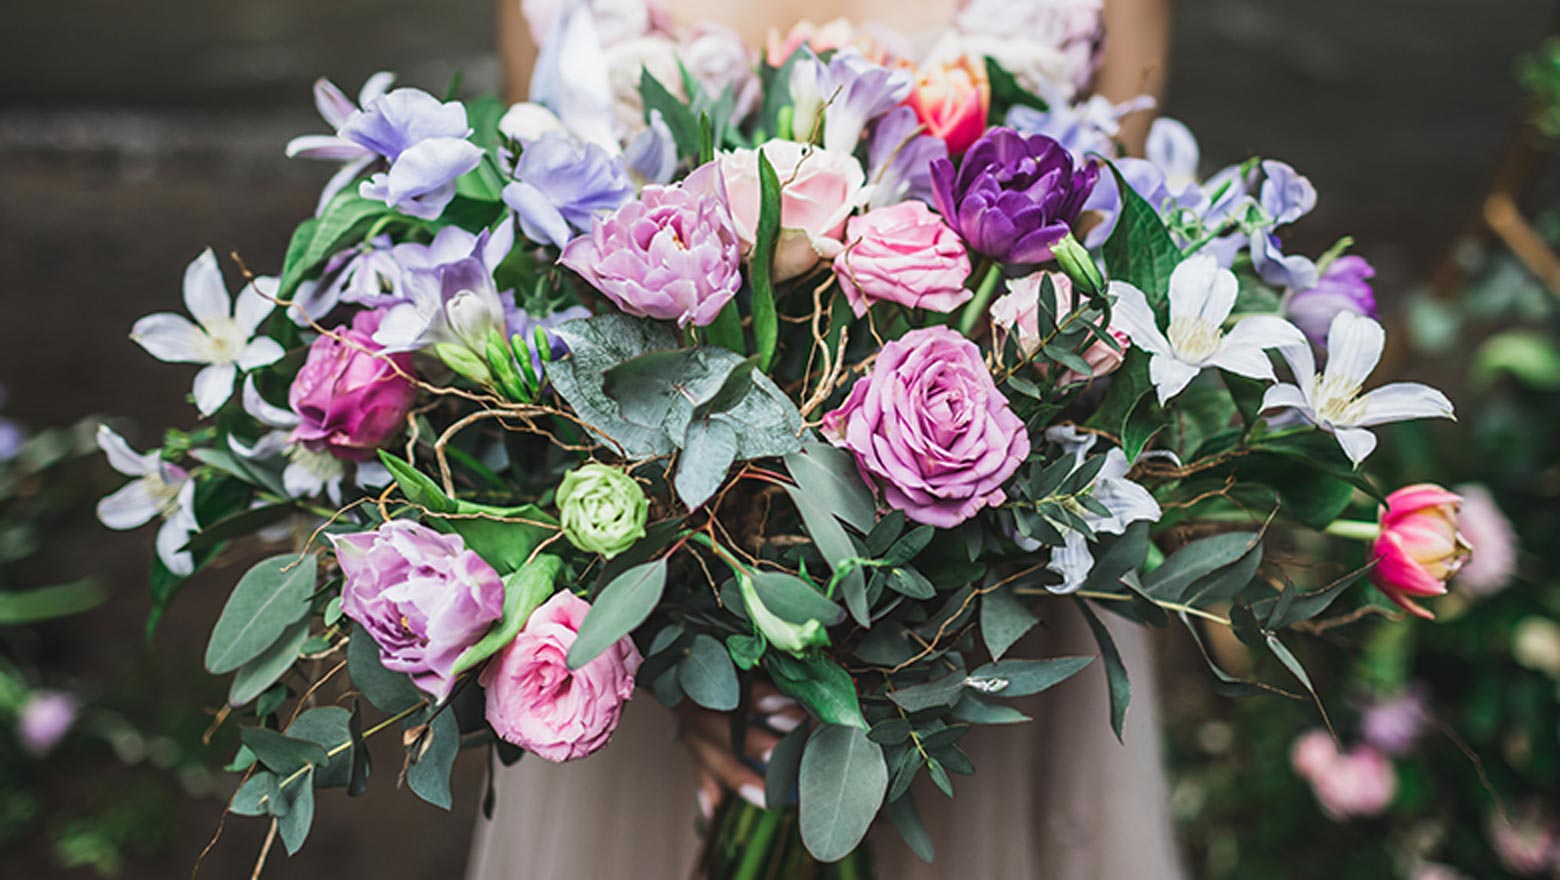 Walk Down the Aisle with These Wildflowers in Your Bouquet